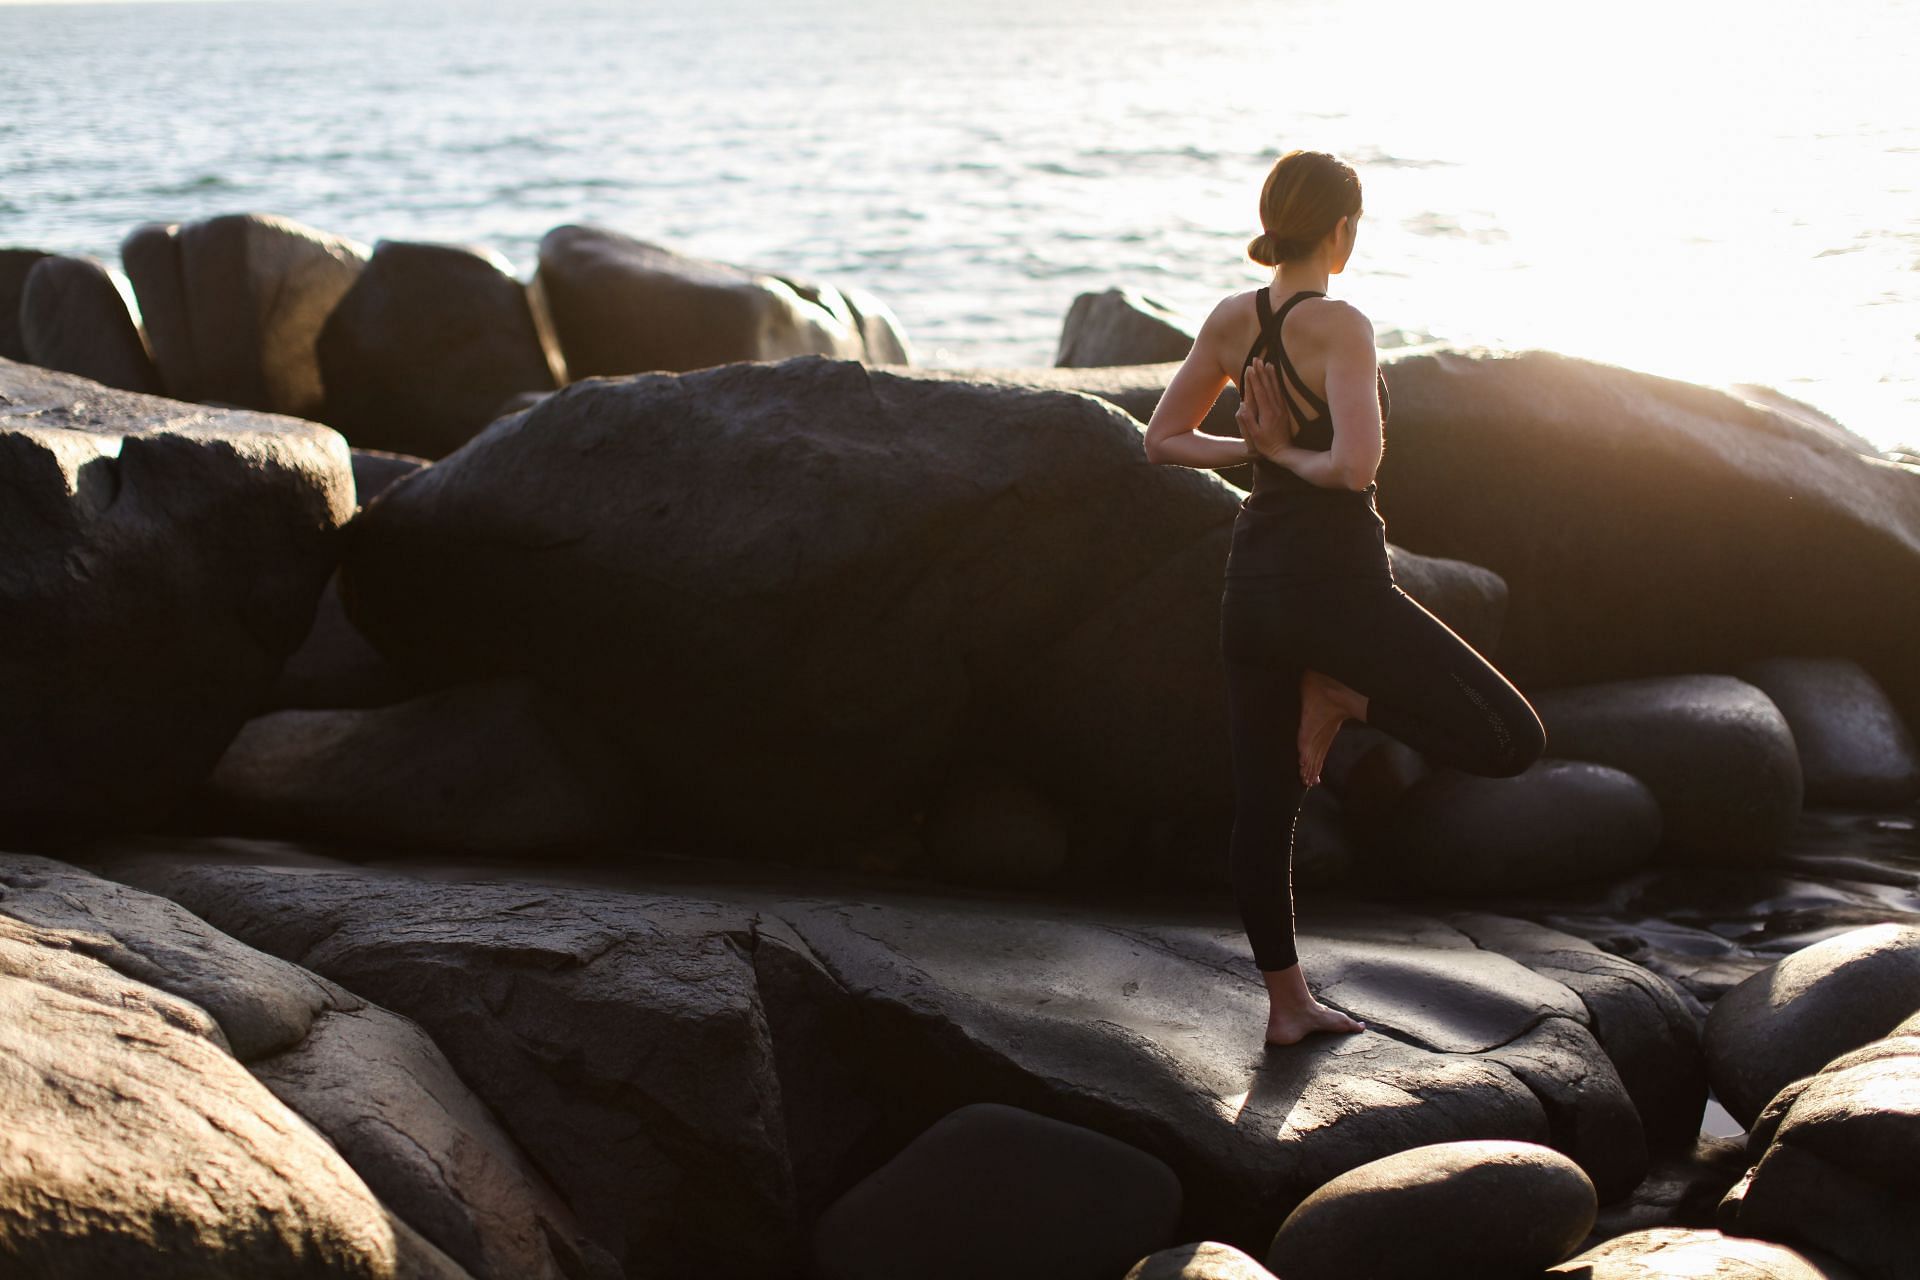 Daily Yin yoga practise can provide physical and mental health benefits (Image via Unsplash / Patrick Mcgregor)